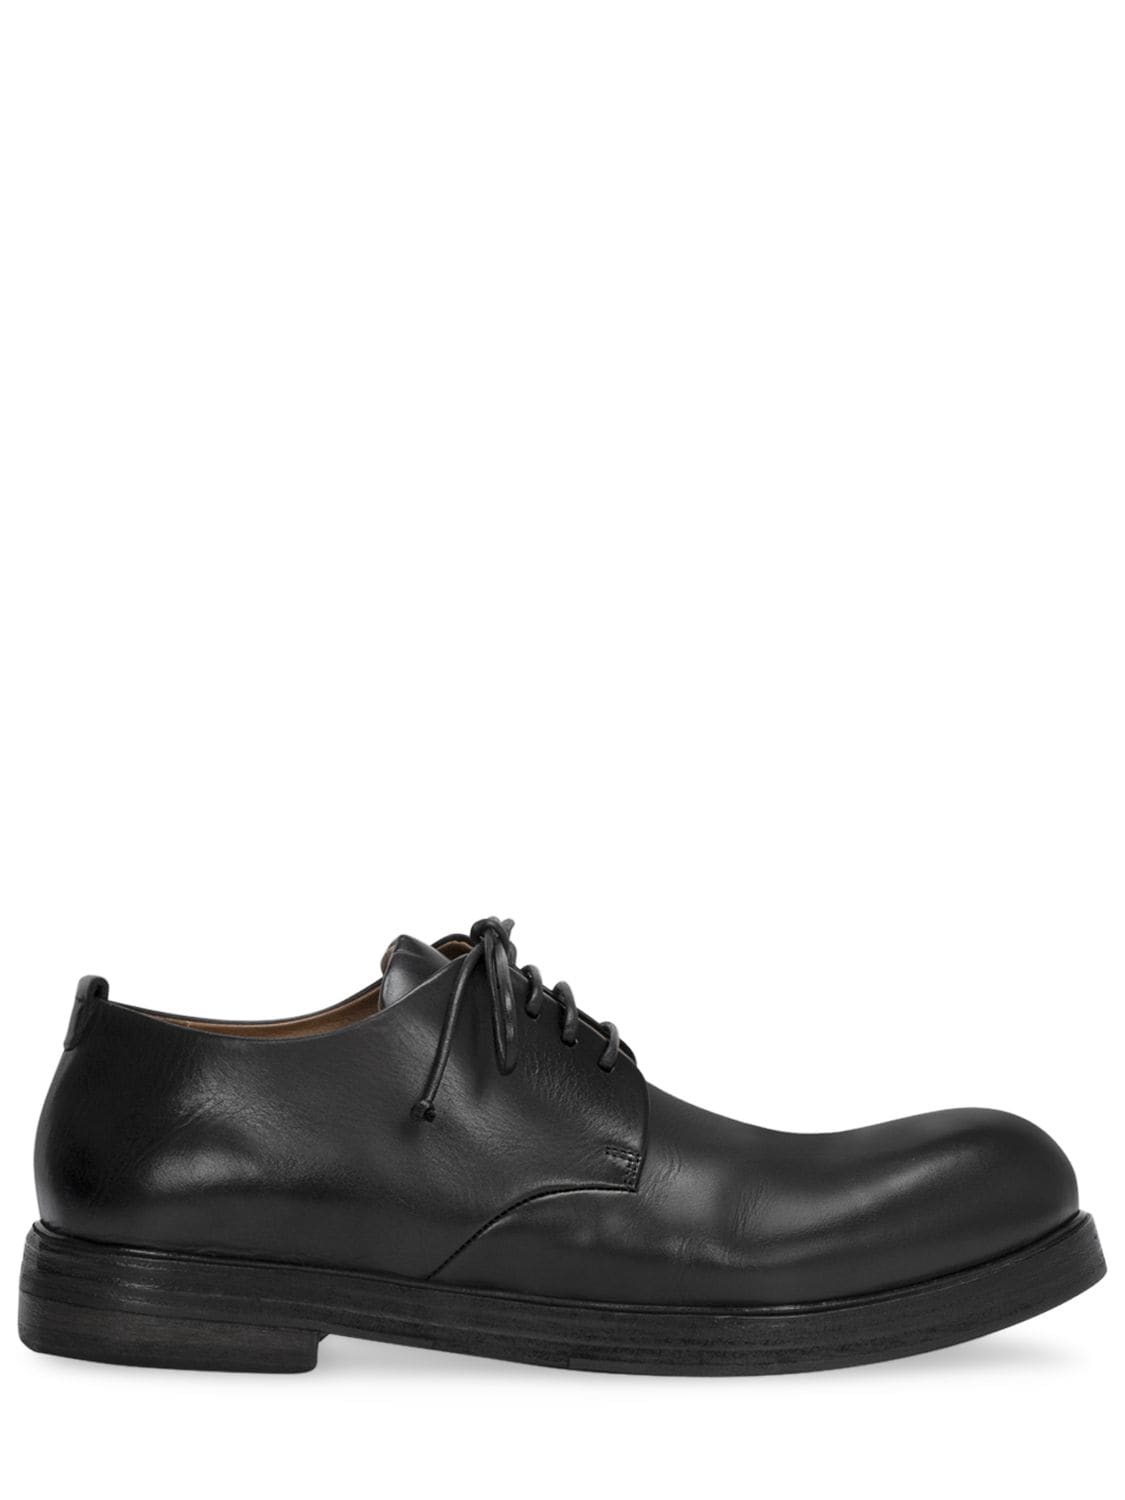 Image of Zucca Zeppa Leather Derby Shoes